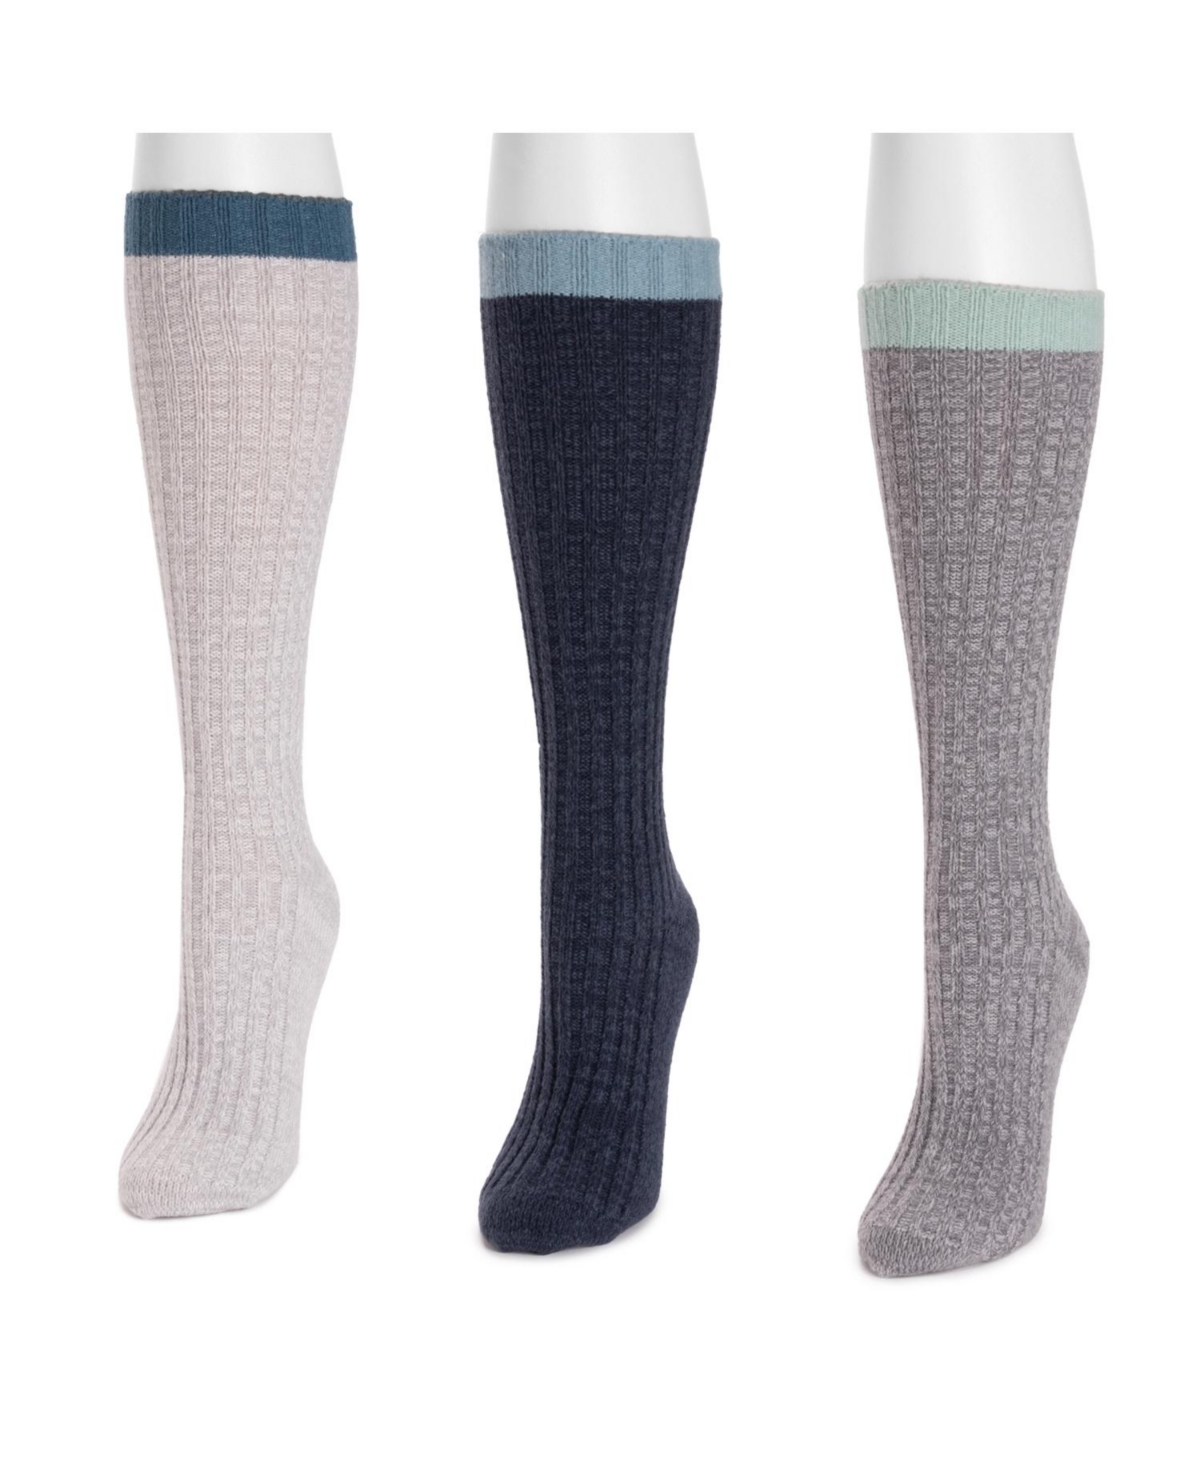 Women's 3 Pair Pack Slouch Socks, One Size - Cool tones